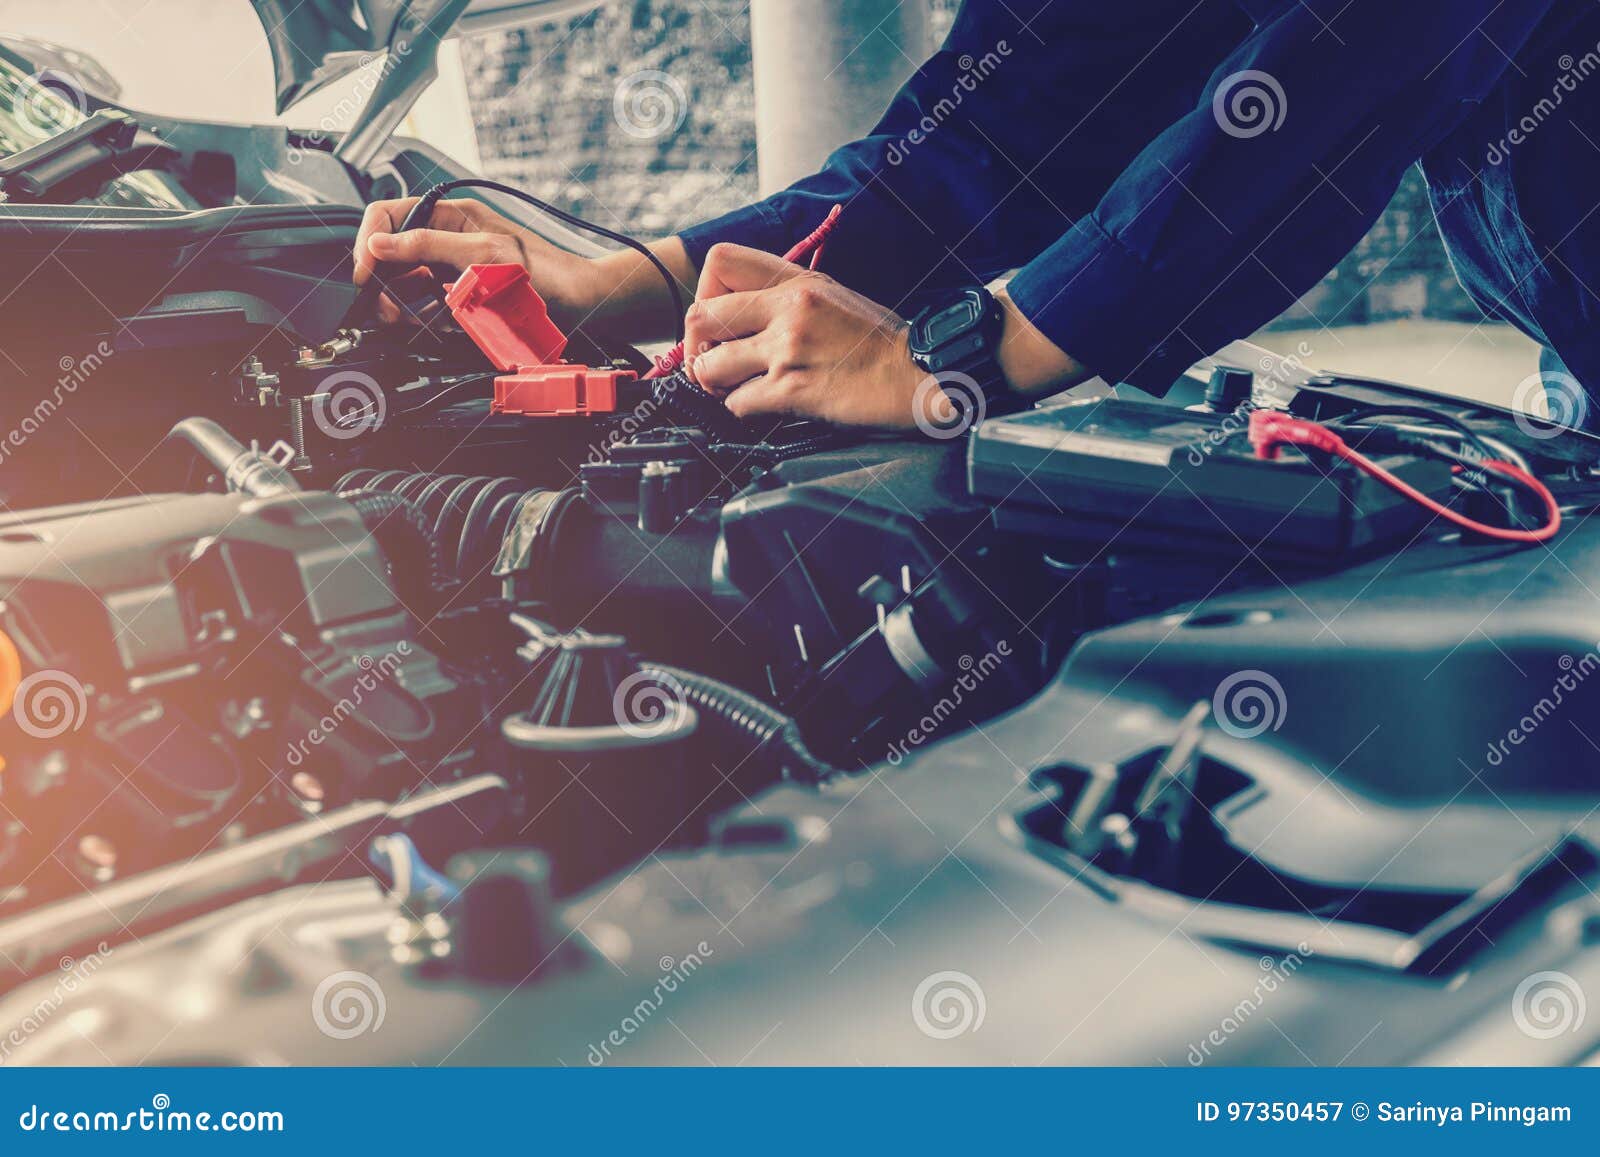 auto mechanic checking car battery voltage